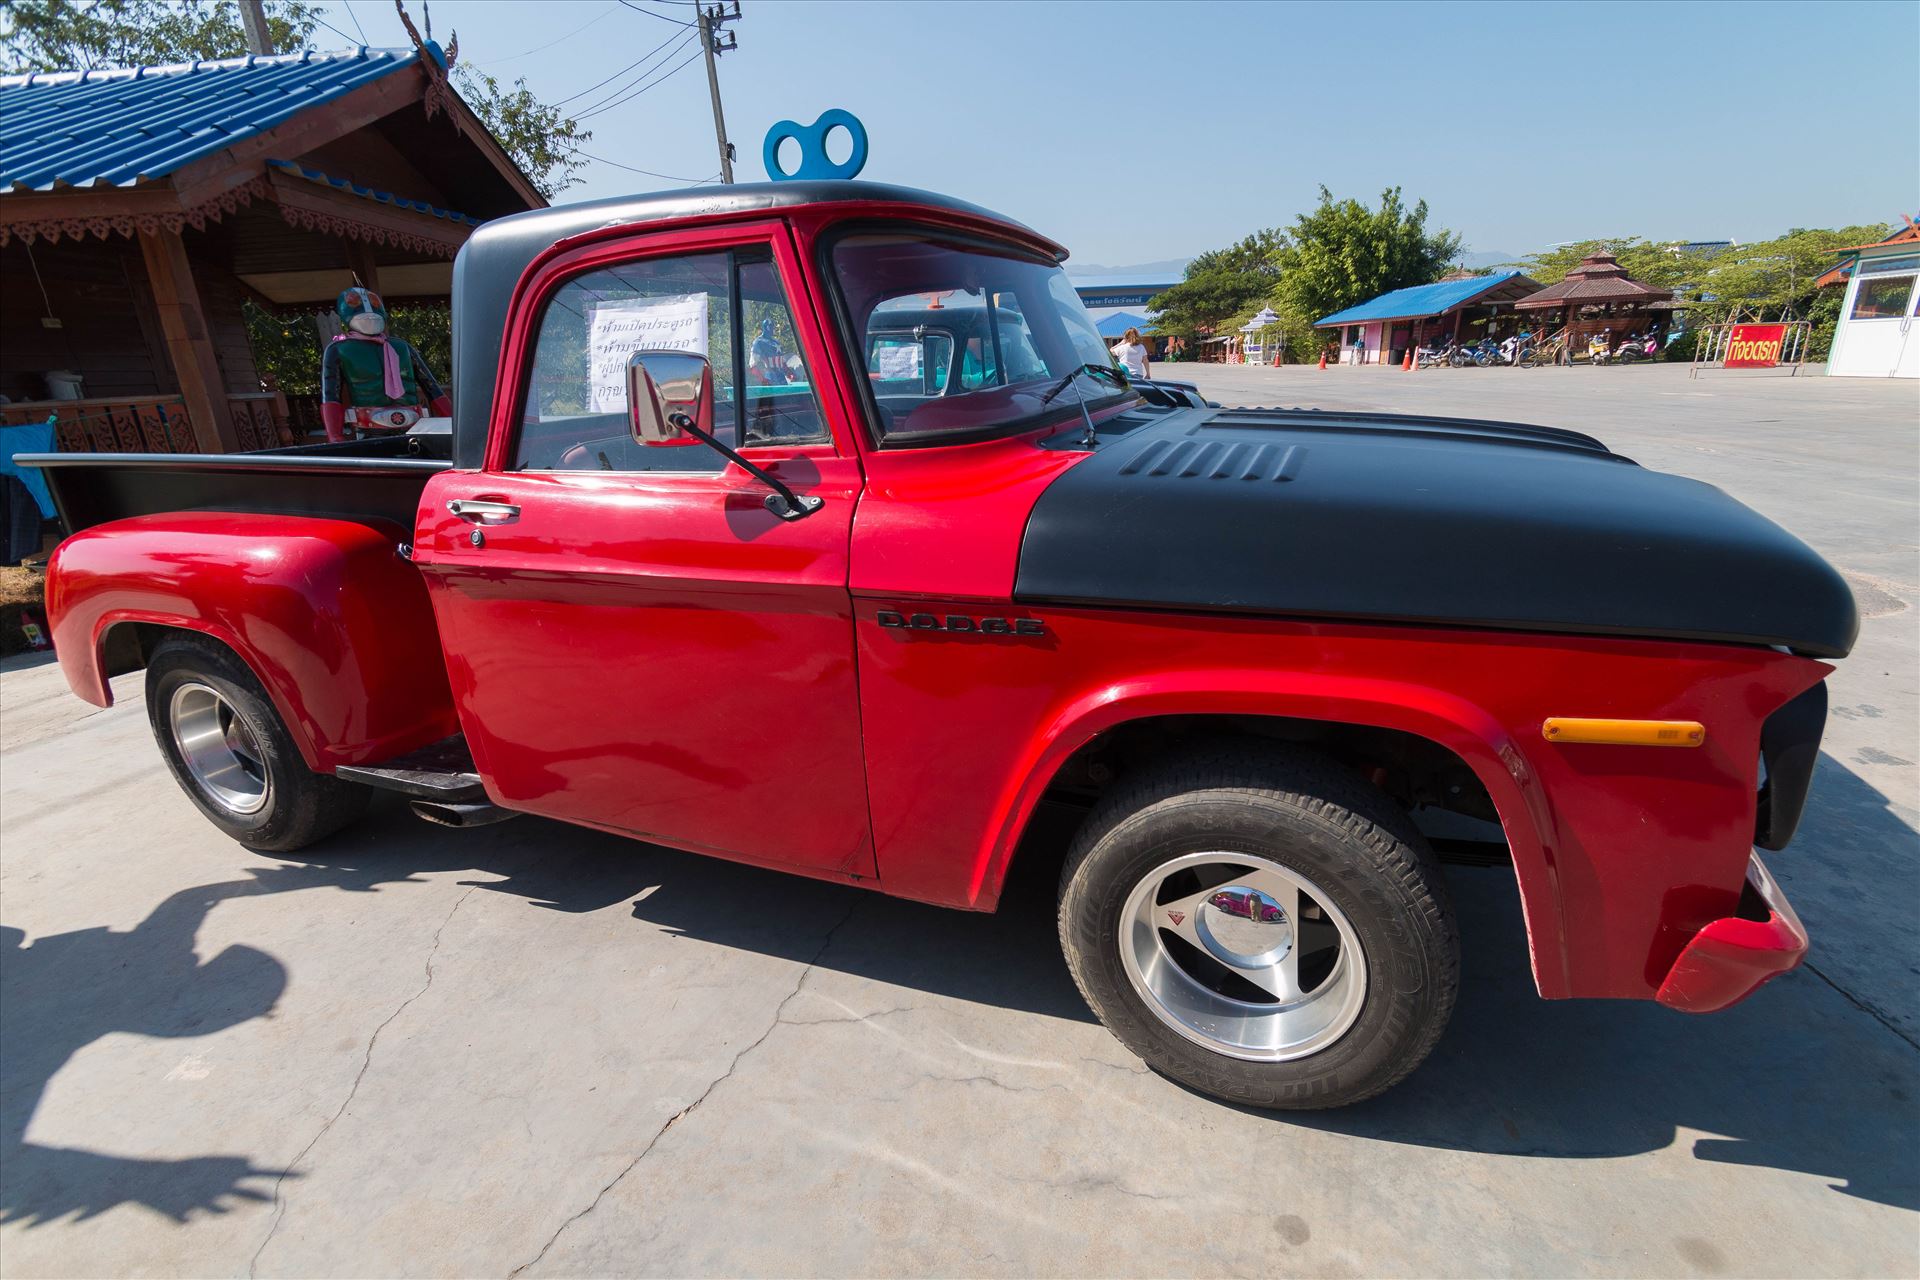 1967 vintage dodge pickup truck  by AnnetteJohnsonPhotography